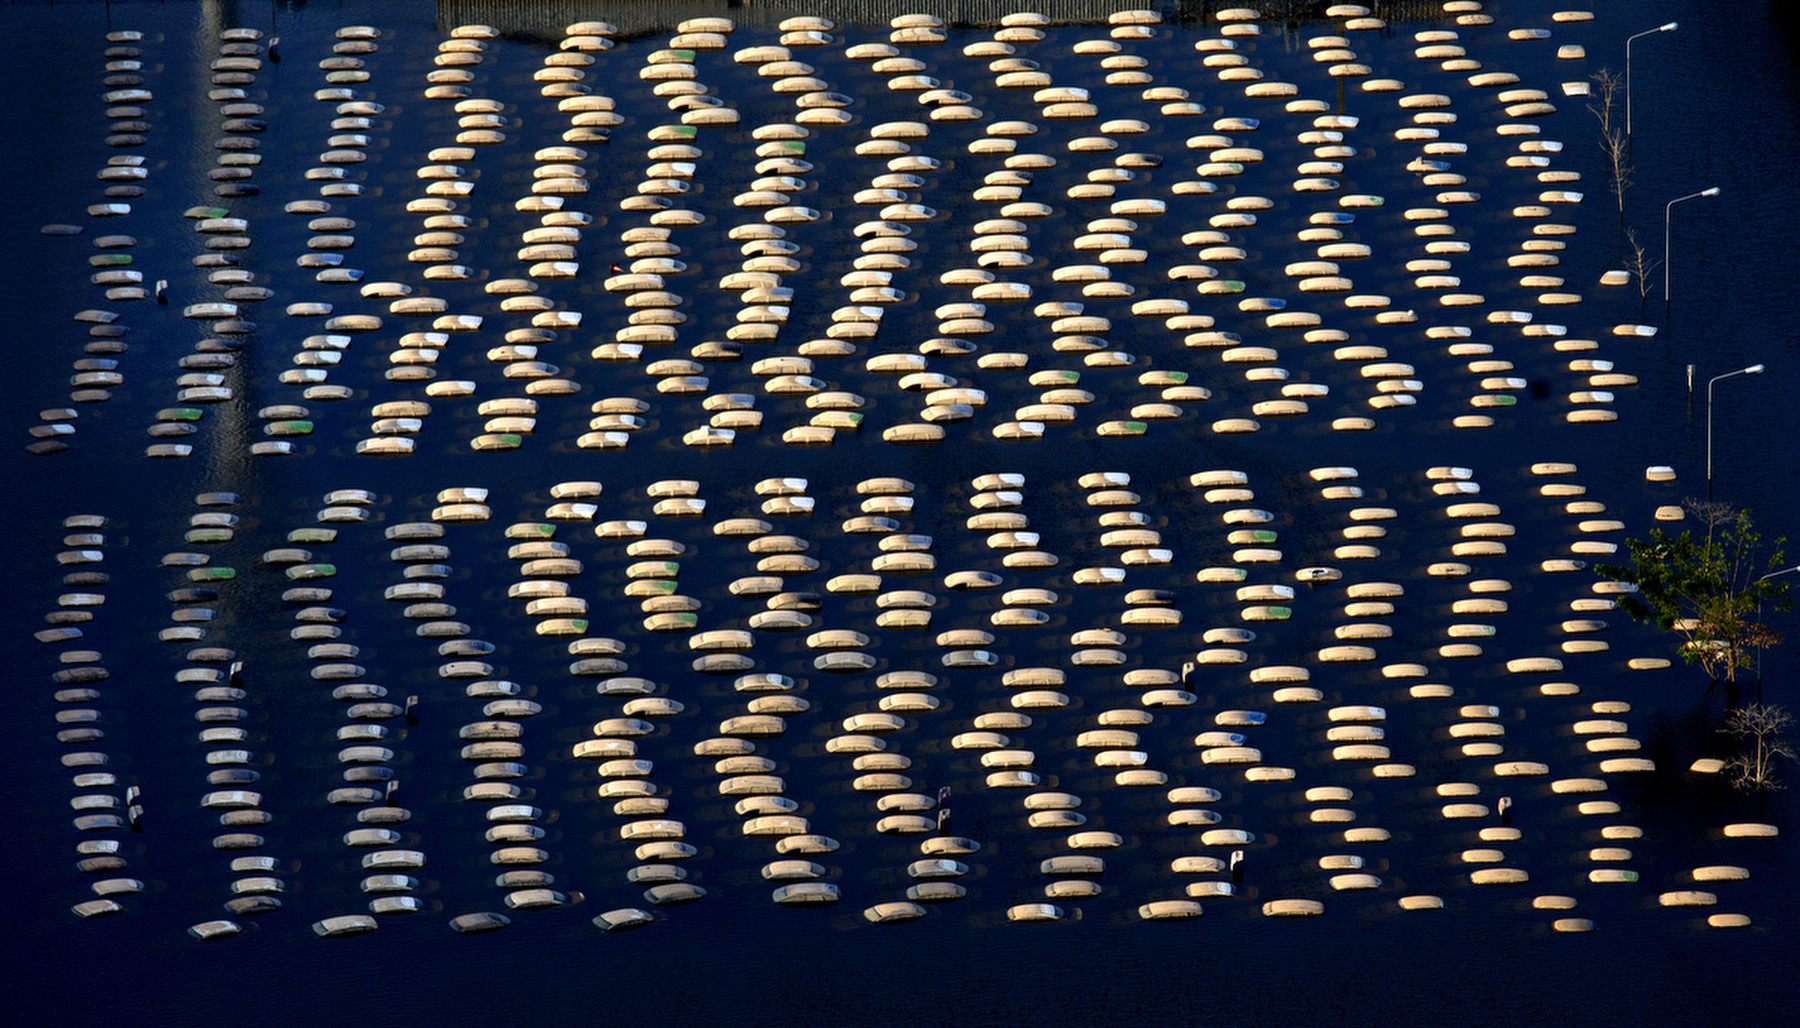 AYUTTHAYA,THAILAND - NOVEMBER 14 :  Honda vehicles are seen in an aerial photo at the flooded Honda factory in the Rojuna Industrial district November 14, 2011 in Ayutthaya, Thailand. While the city of Ayutthaya is recovering from the floods the factories are still underwater for at least a month.  Over seven major industrial parks in Bangkok and, thousands of factories have been closed in the central Thai province of Ayutthaya and Nonthaburi with millions of tons of rice damaged. Across the country, the flooding which is now in its third month has affected over 25 of Thailand\'s 64 provinces. Thailand is experiencing the worst flooding in over 50 years which has affected more than nine million people. Over 400 people have died in flood-related incidents since late July according to the Department of Disaster Prevention and Mitigation.(Photo by Paula Bronstein /Getty Images)